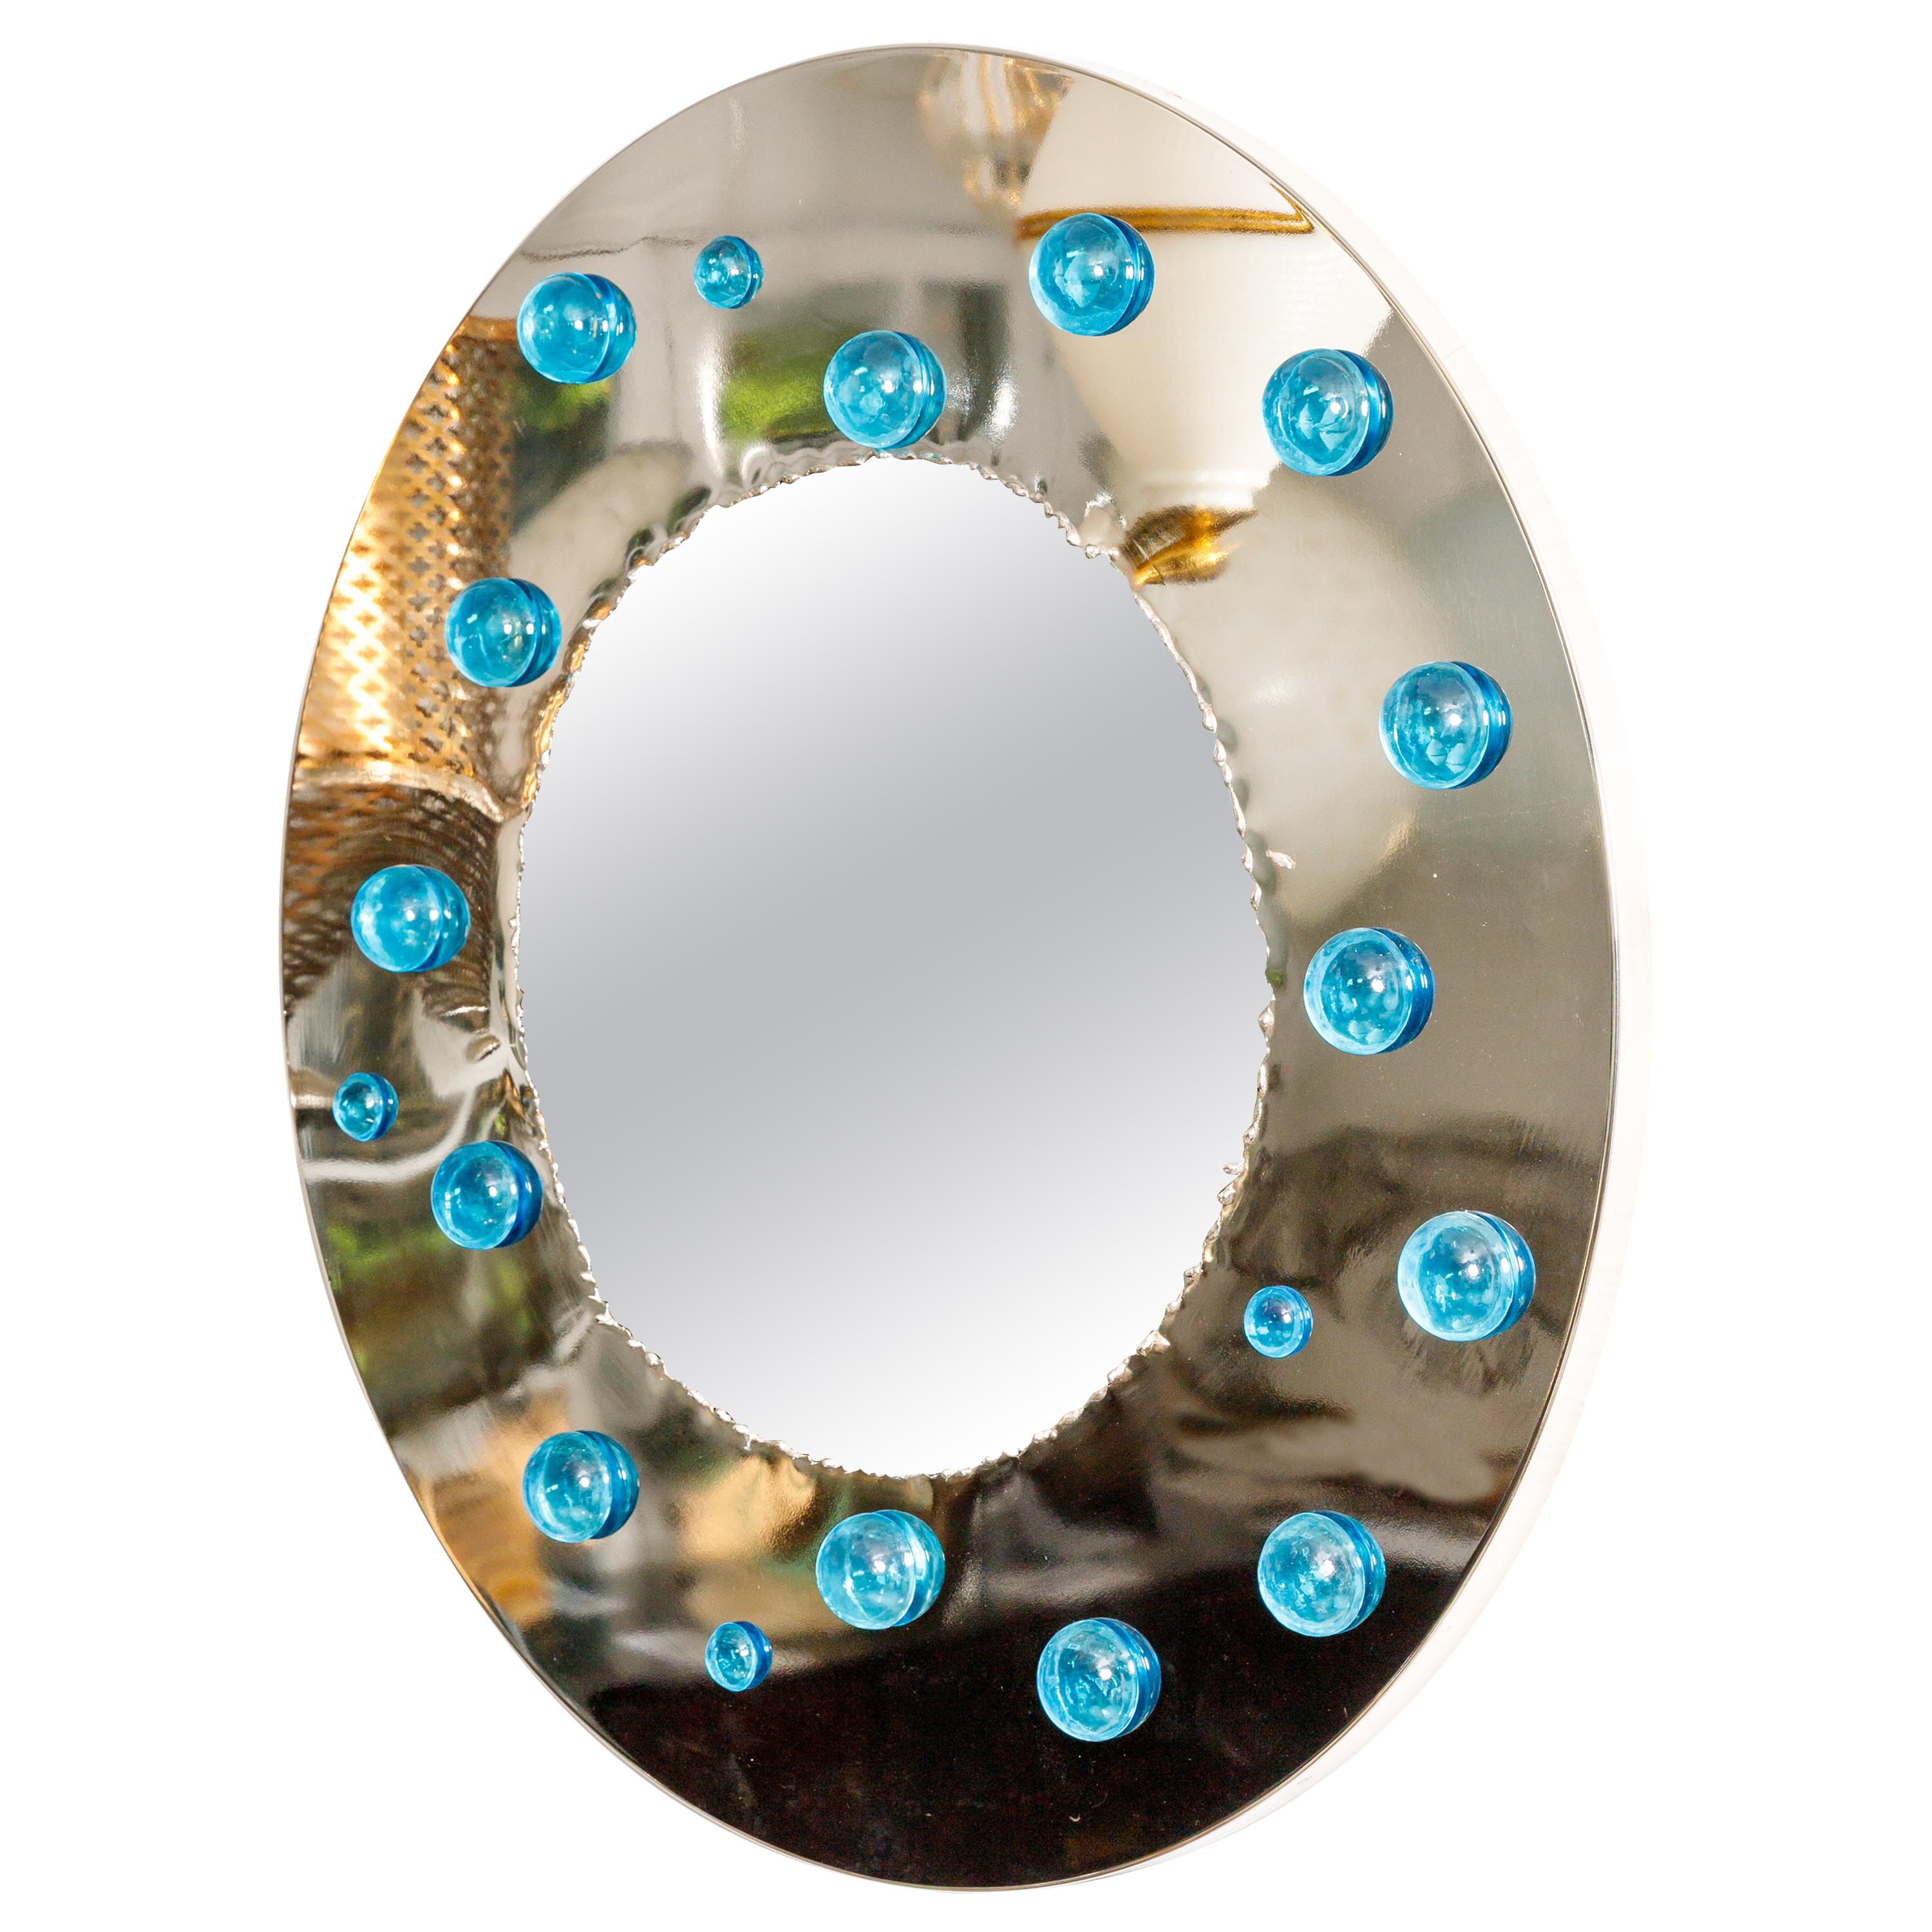 Round Chrome Surround Mirror with Blue Dot Glass Appliques